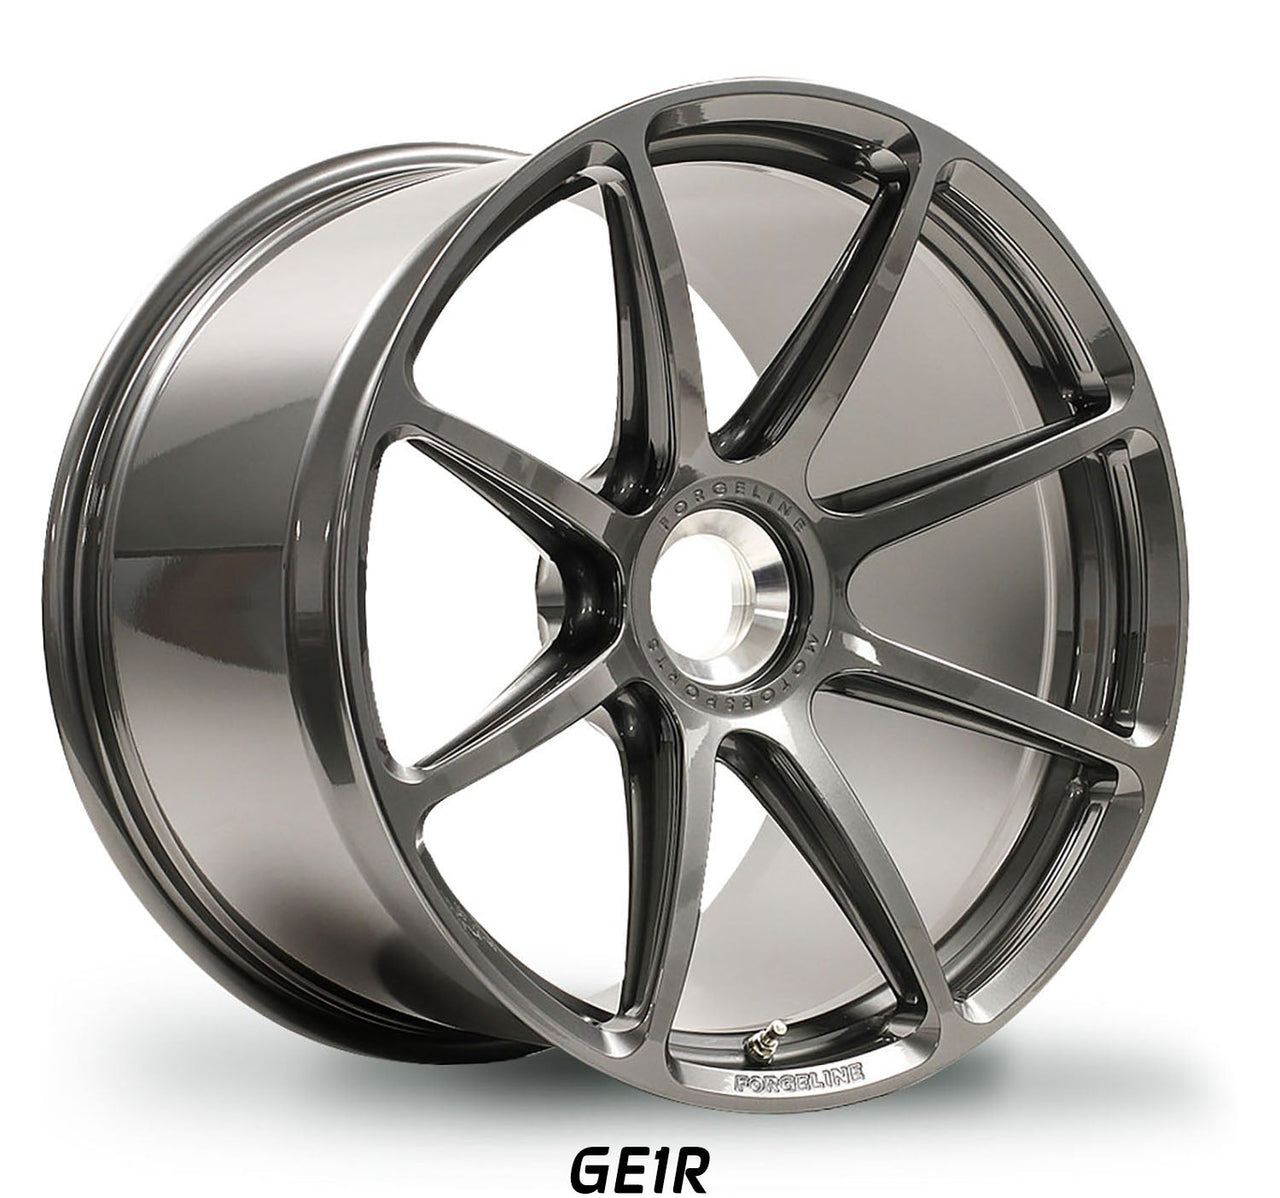 Pearl Gray Forgeline GE1R center lock for Porsche 991 GT3 best pricing on wheels for HPDE and Time Trials